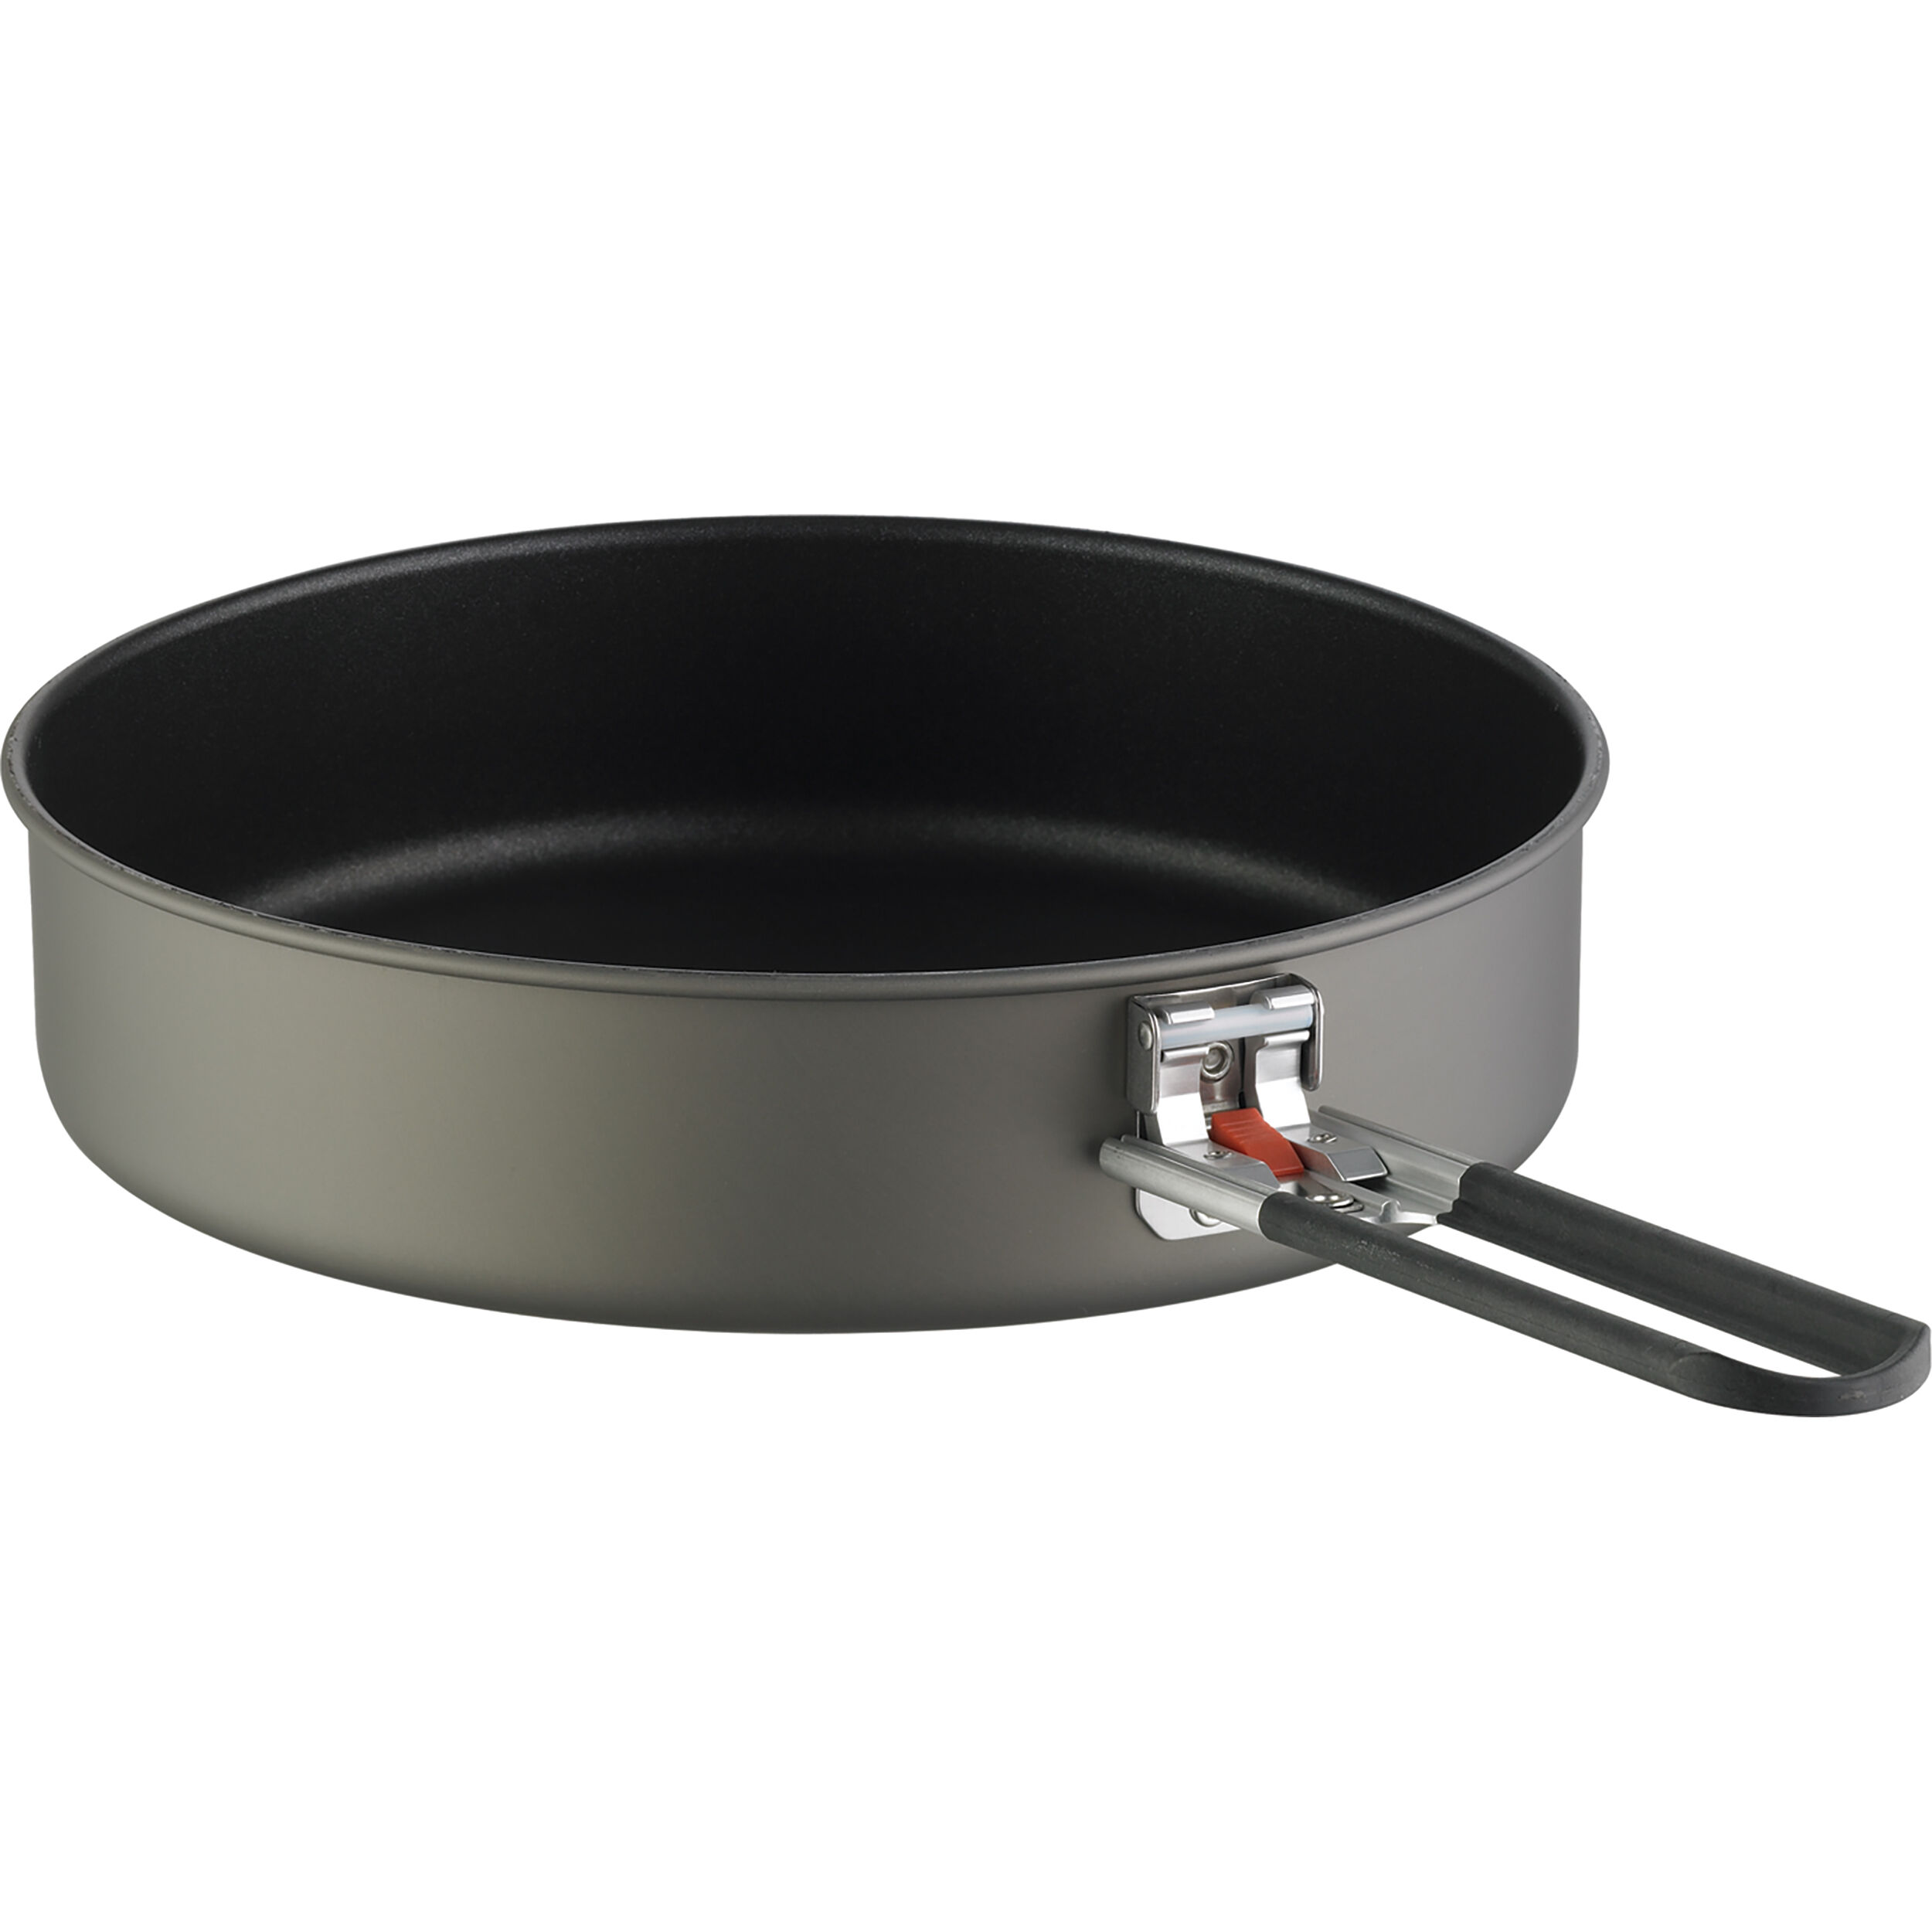 Camping Cookware | Backpacking & Camping Cookware | MSR®